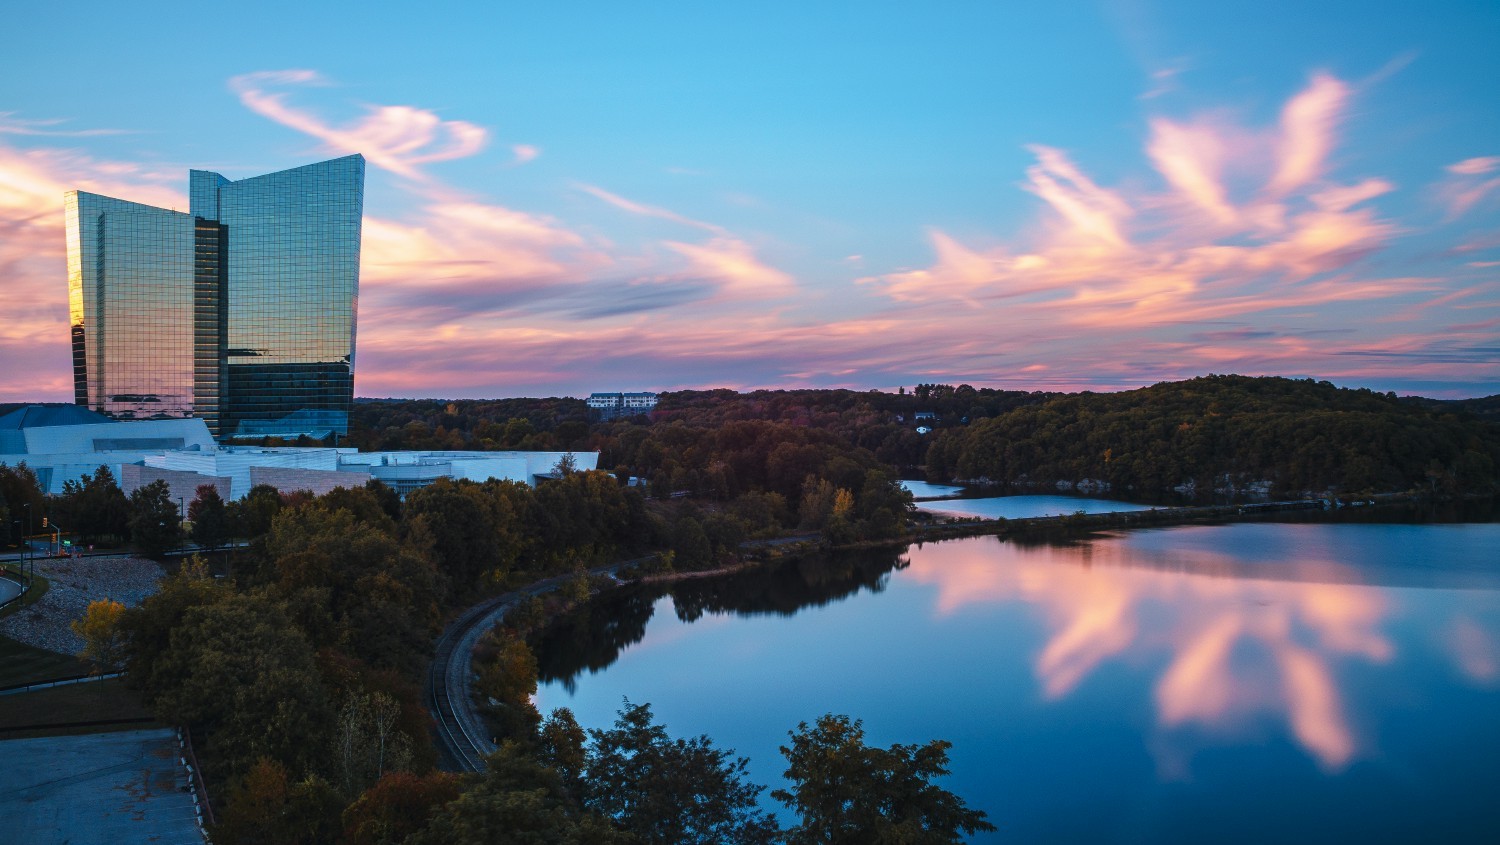 Mohegan Sun is located on 240 acres of reservation land along the banks of the Thames River in Uncasville, Connecticut.